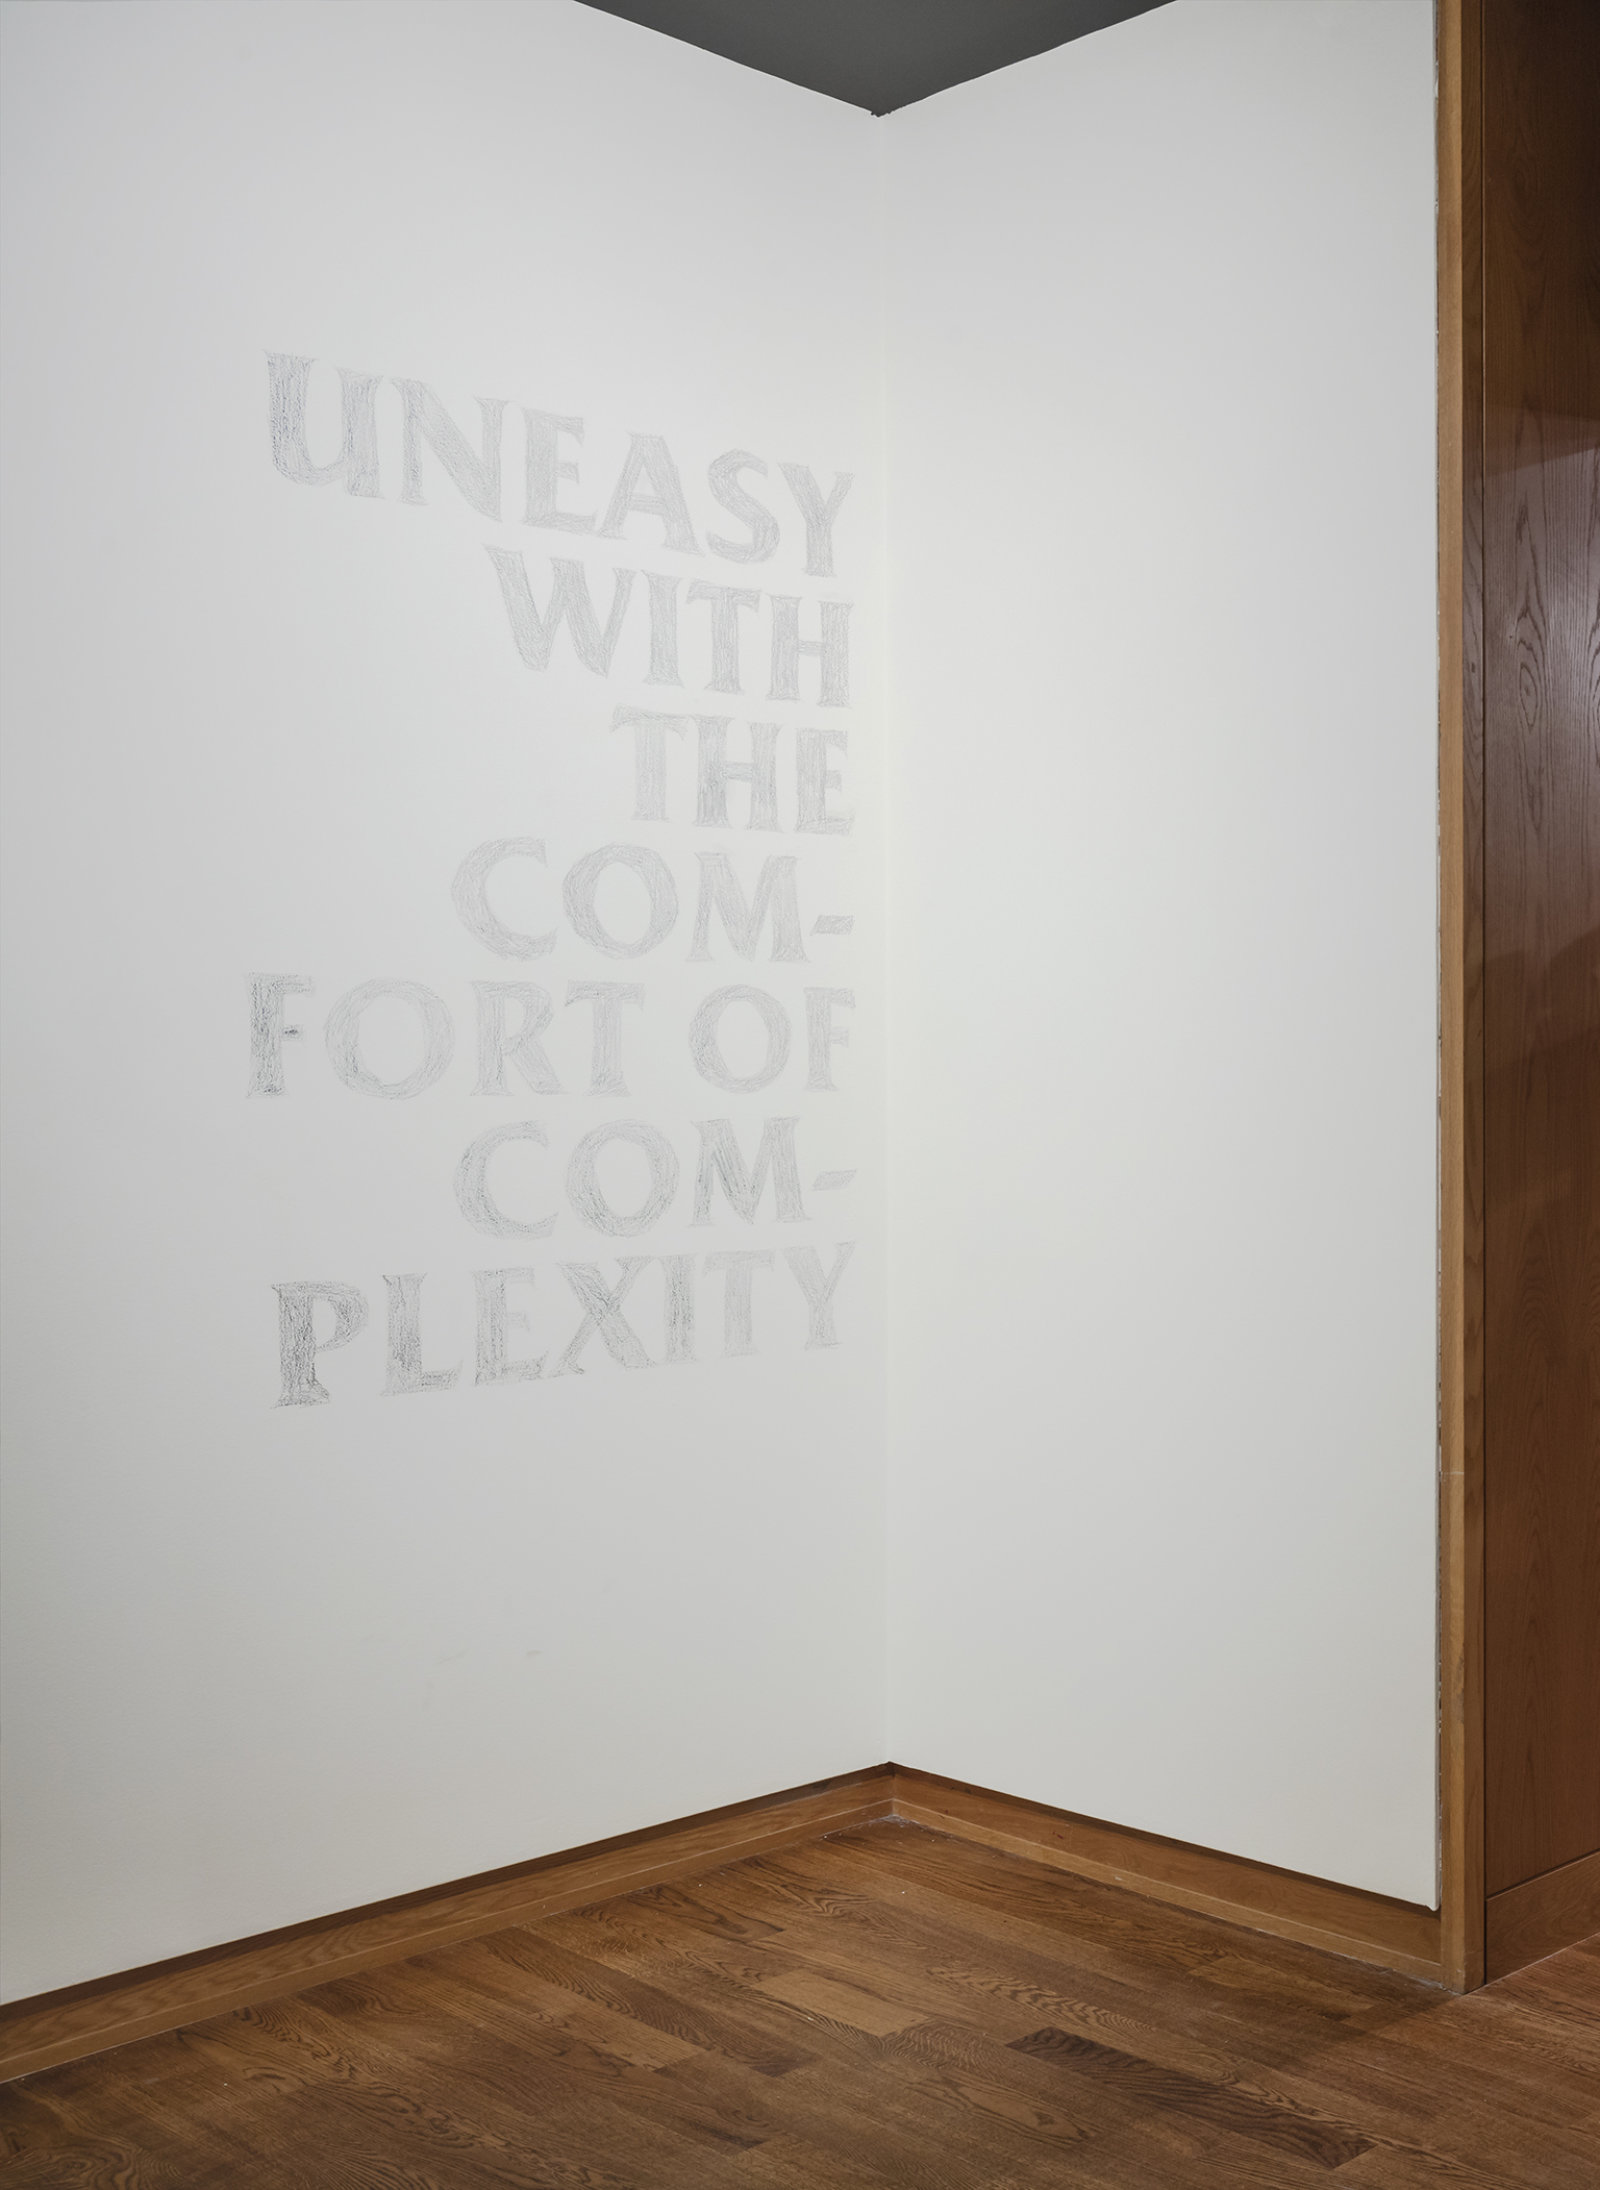 Raymond Boisjoly, Uneasy with the Comfort of Complexity, 2017, beer can wall rubbing, dimensions variable